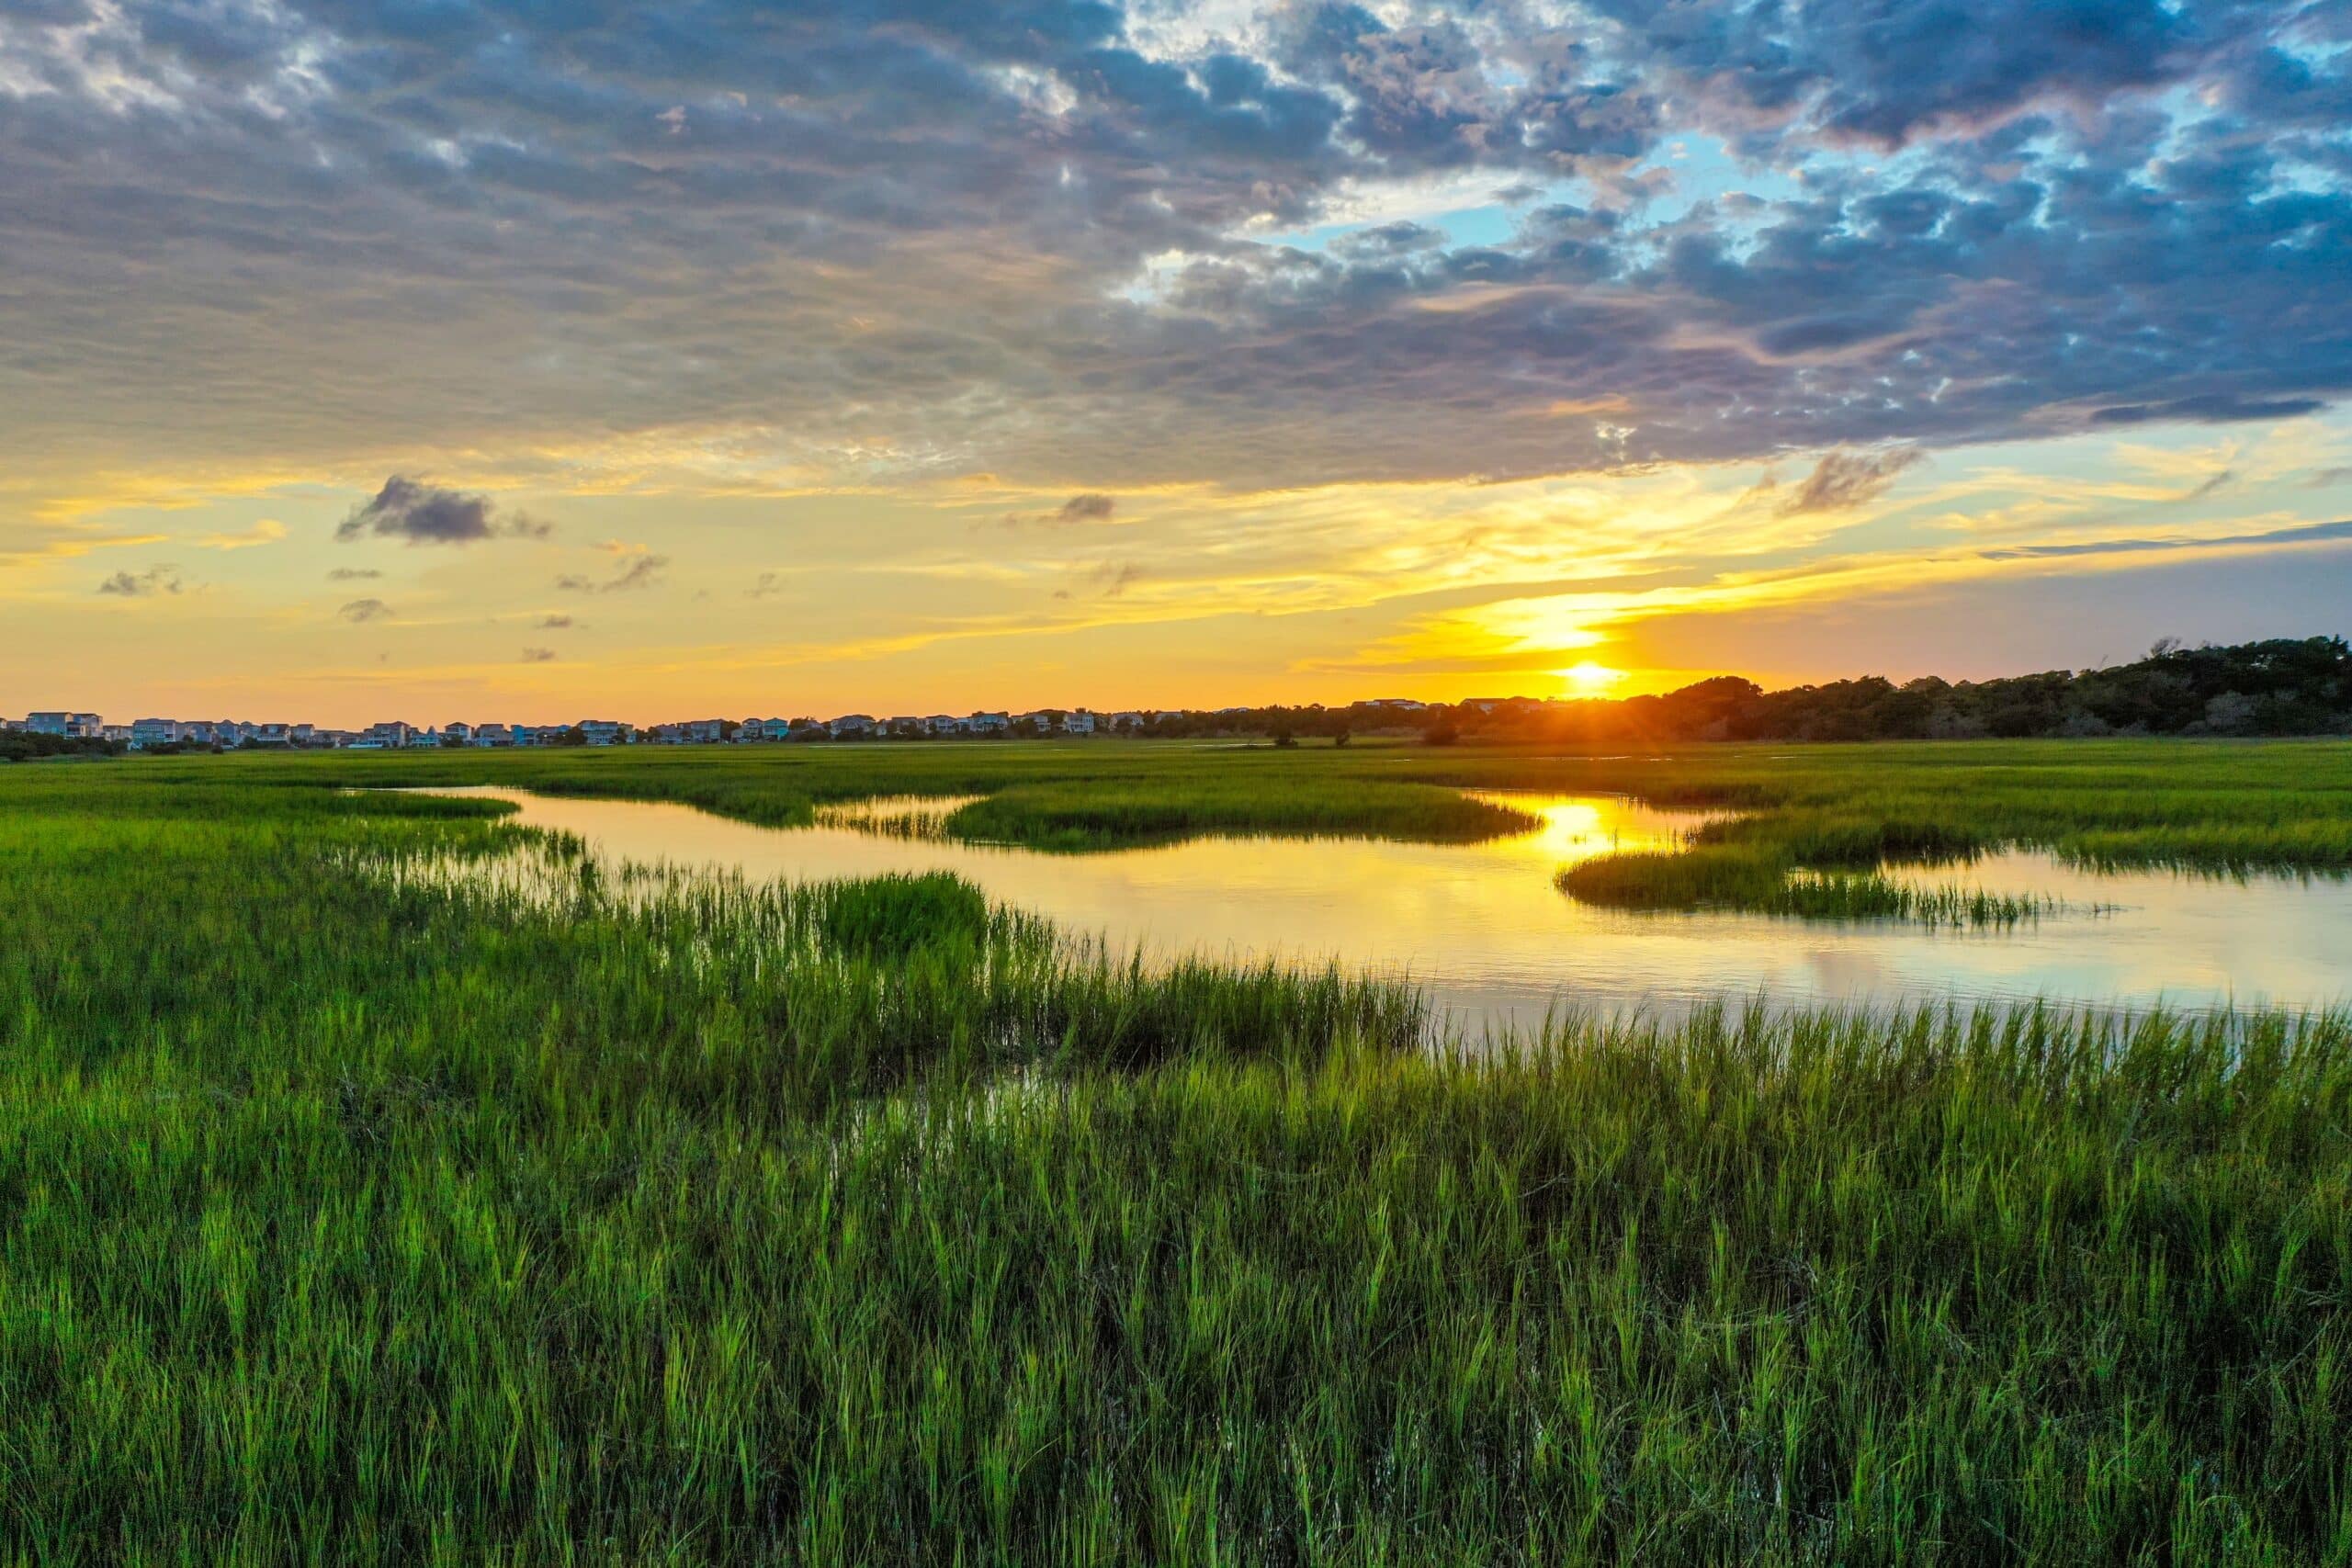 The sun is setting over a marsh with grass and water.